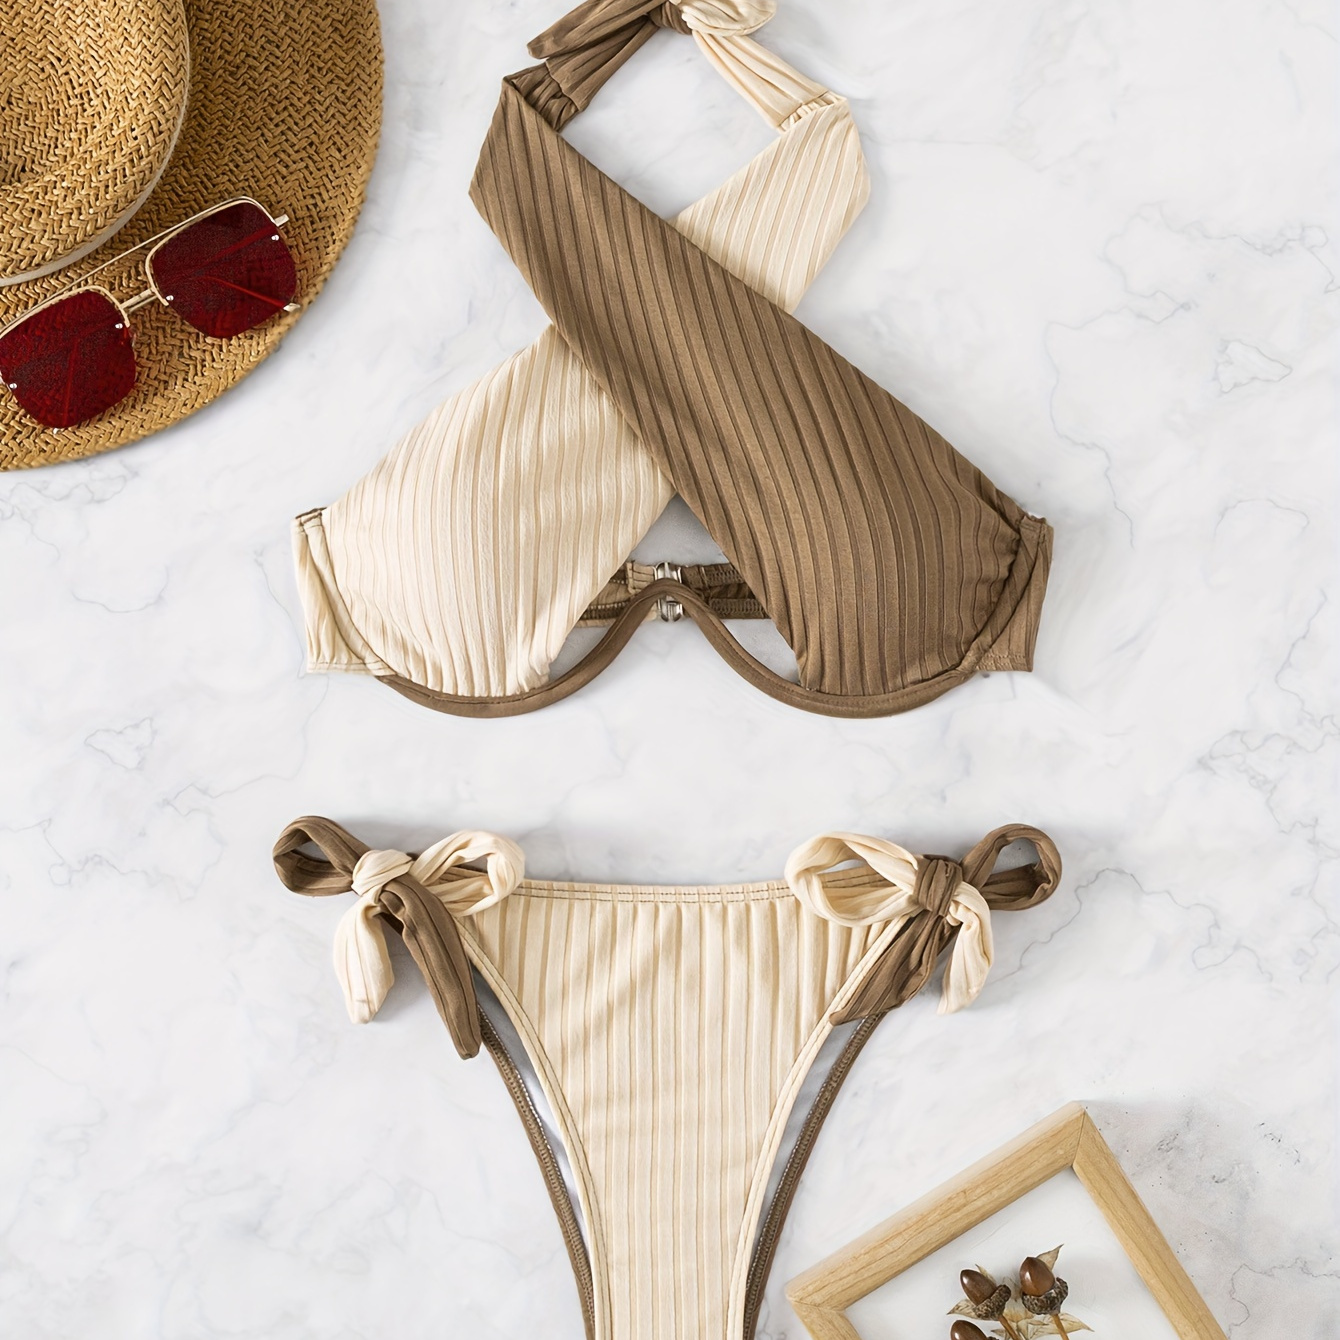 

Khaki Brown Criss Cross Neck Knot 2 Piece Set Bikini, Rib Knit Color Block Stretchy Ruched Backless Swimsuit For Beach Pool Bathing, Women's Swimwear & Clothing